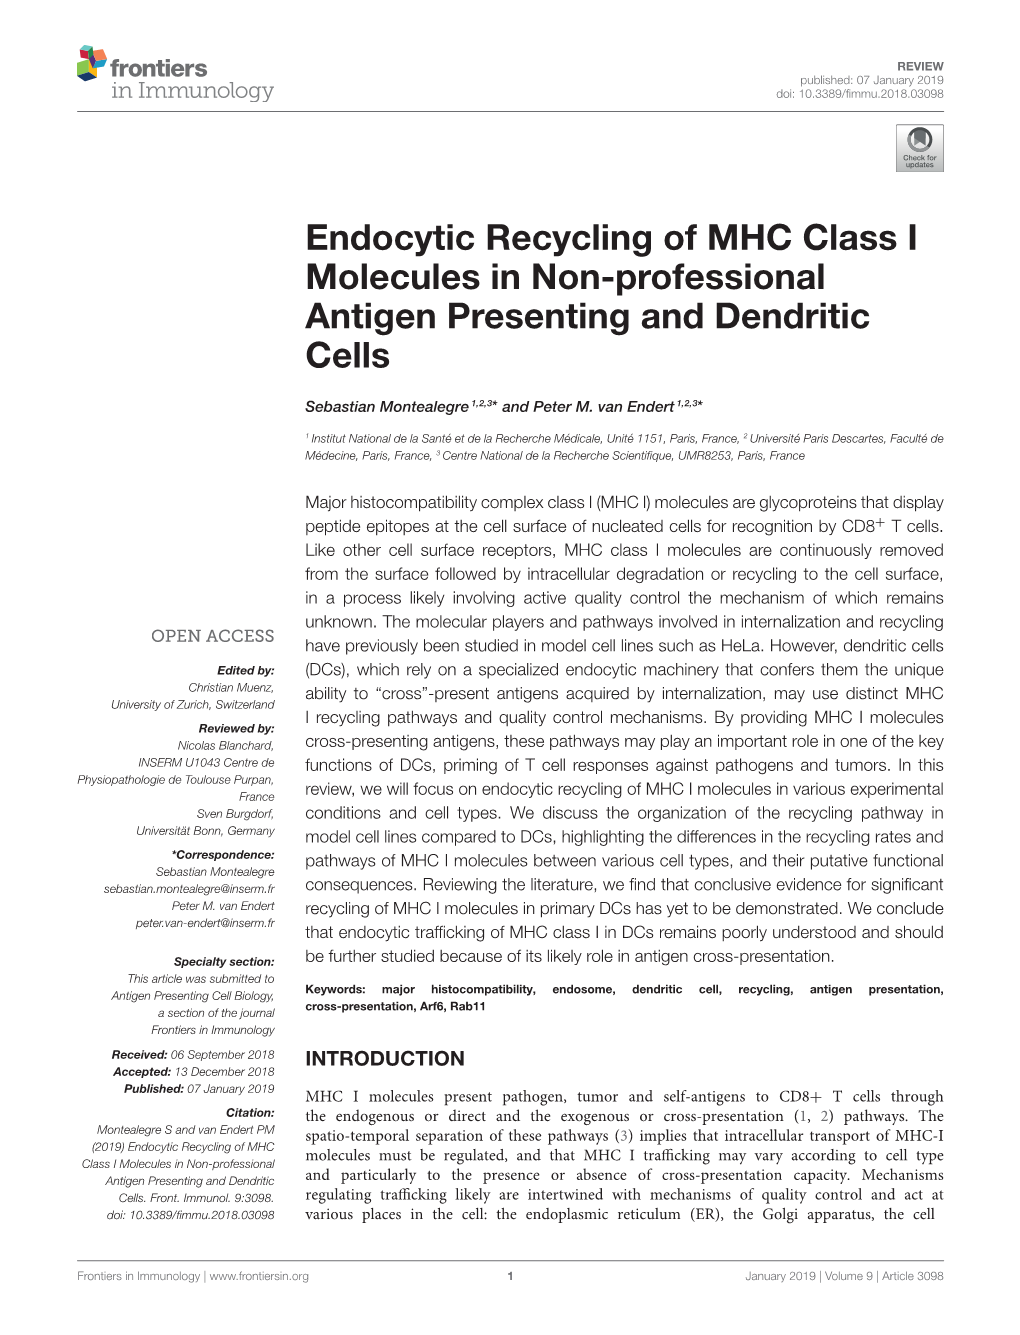 Endocytic Recycling of MHC Class I Molecules in Non-Professional Antigen Presenting and Dendritic Cells